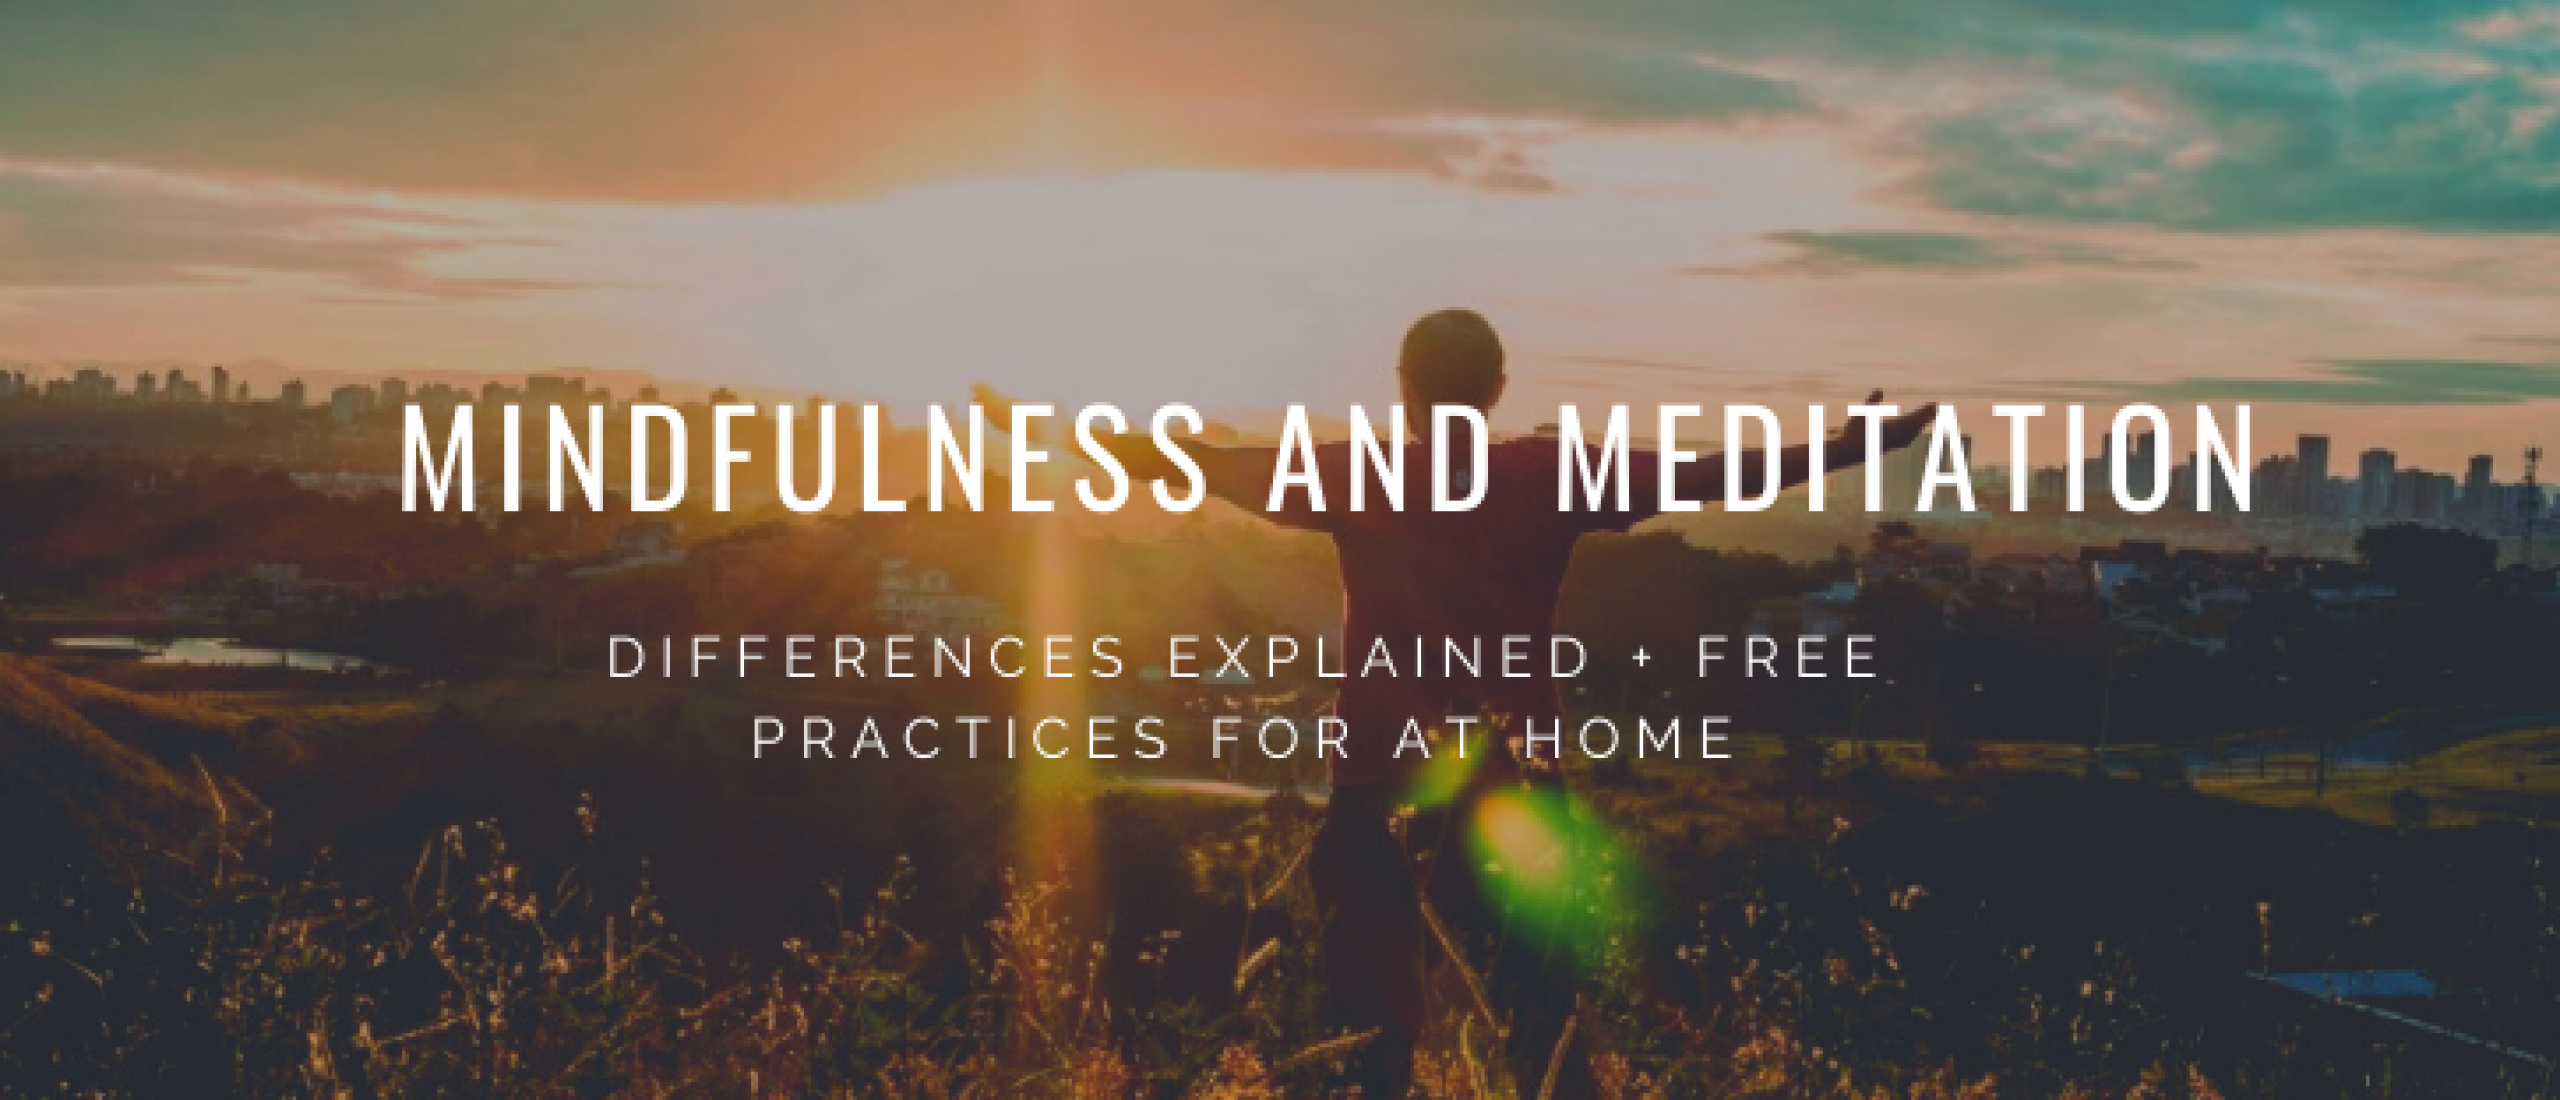 Mindfulness and Meditation: Difference + Free Practices at Home